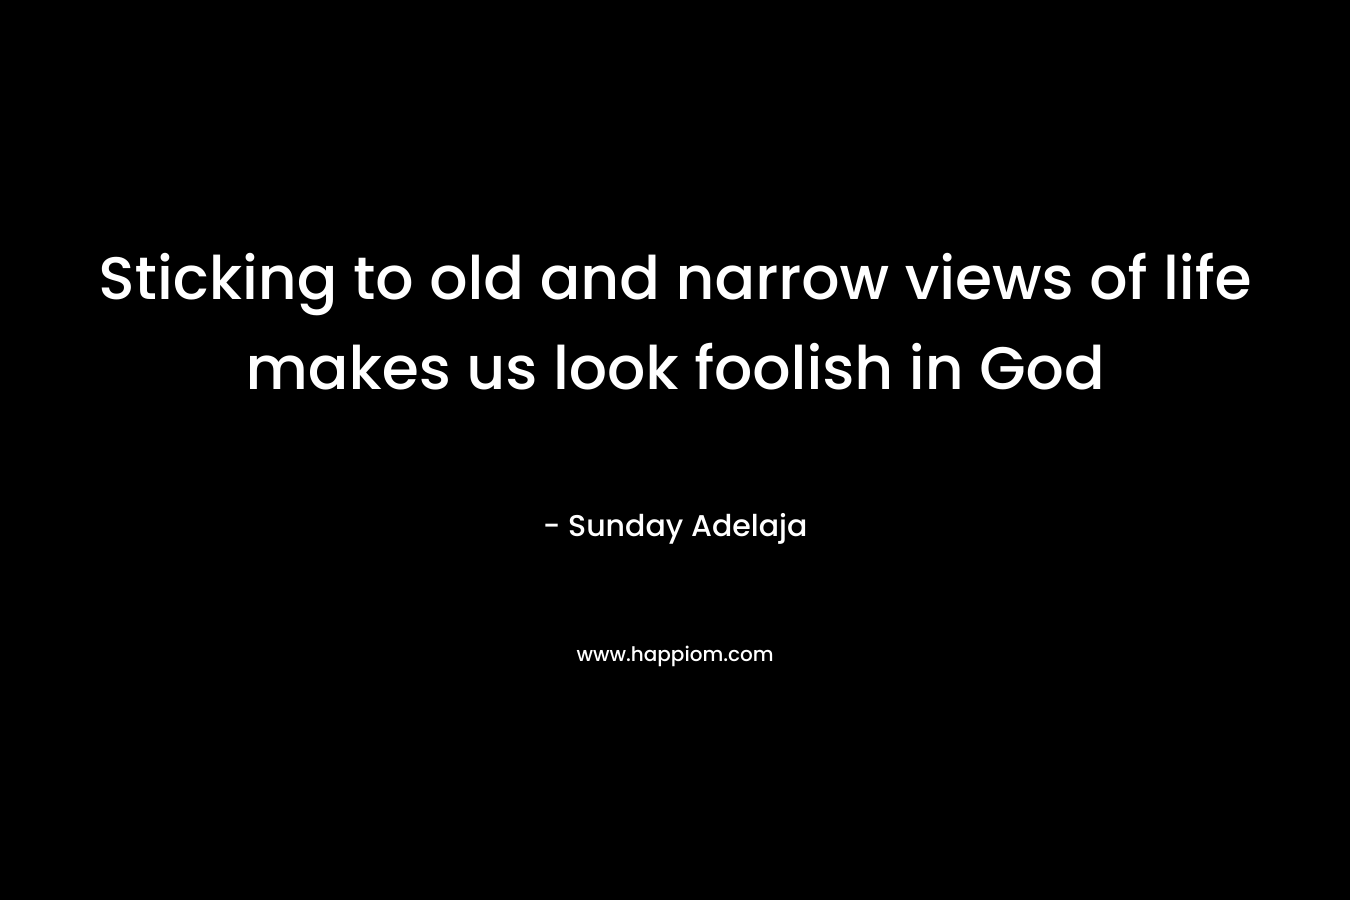 Sticking to old and narrow views of life makes us look foolish in God